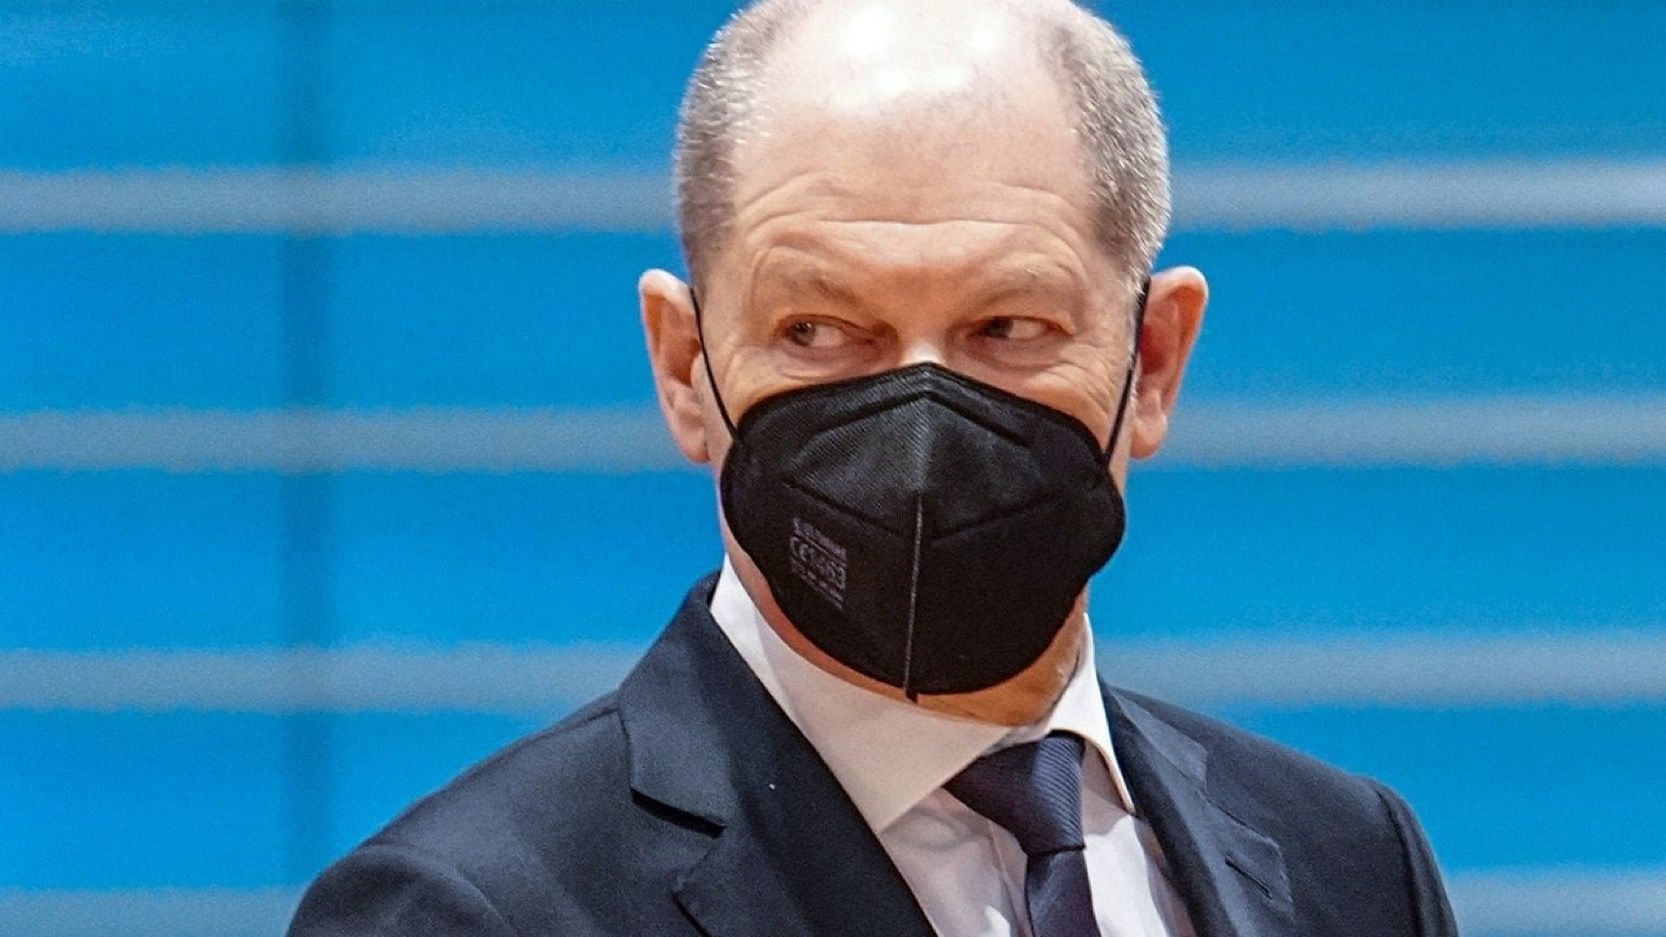 Fully vaccinated and boosted German Chancellor Scholz infected with COVID